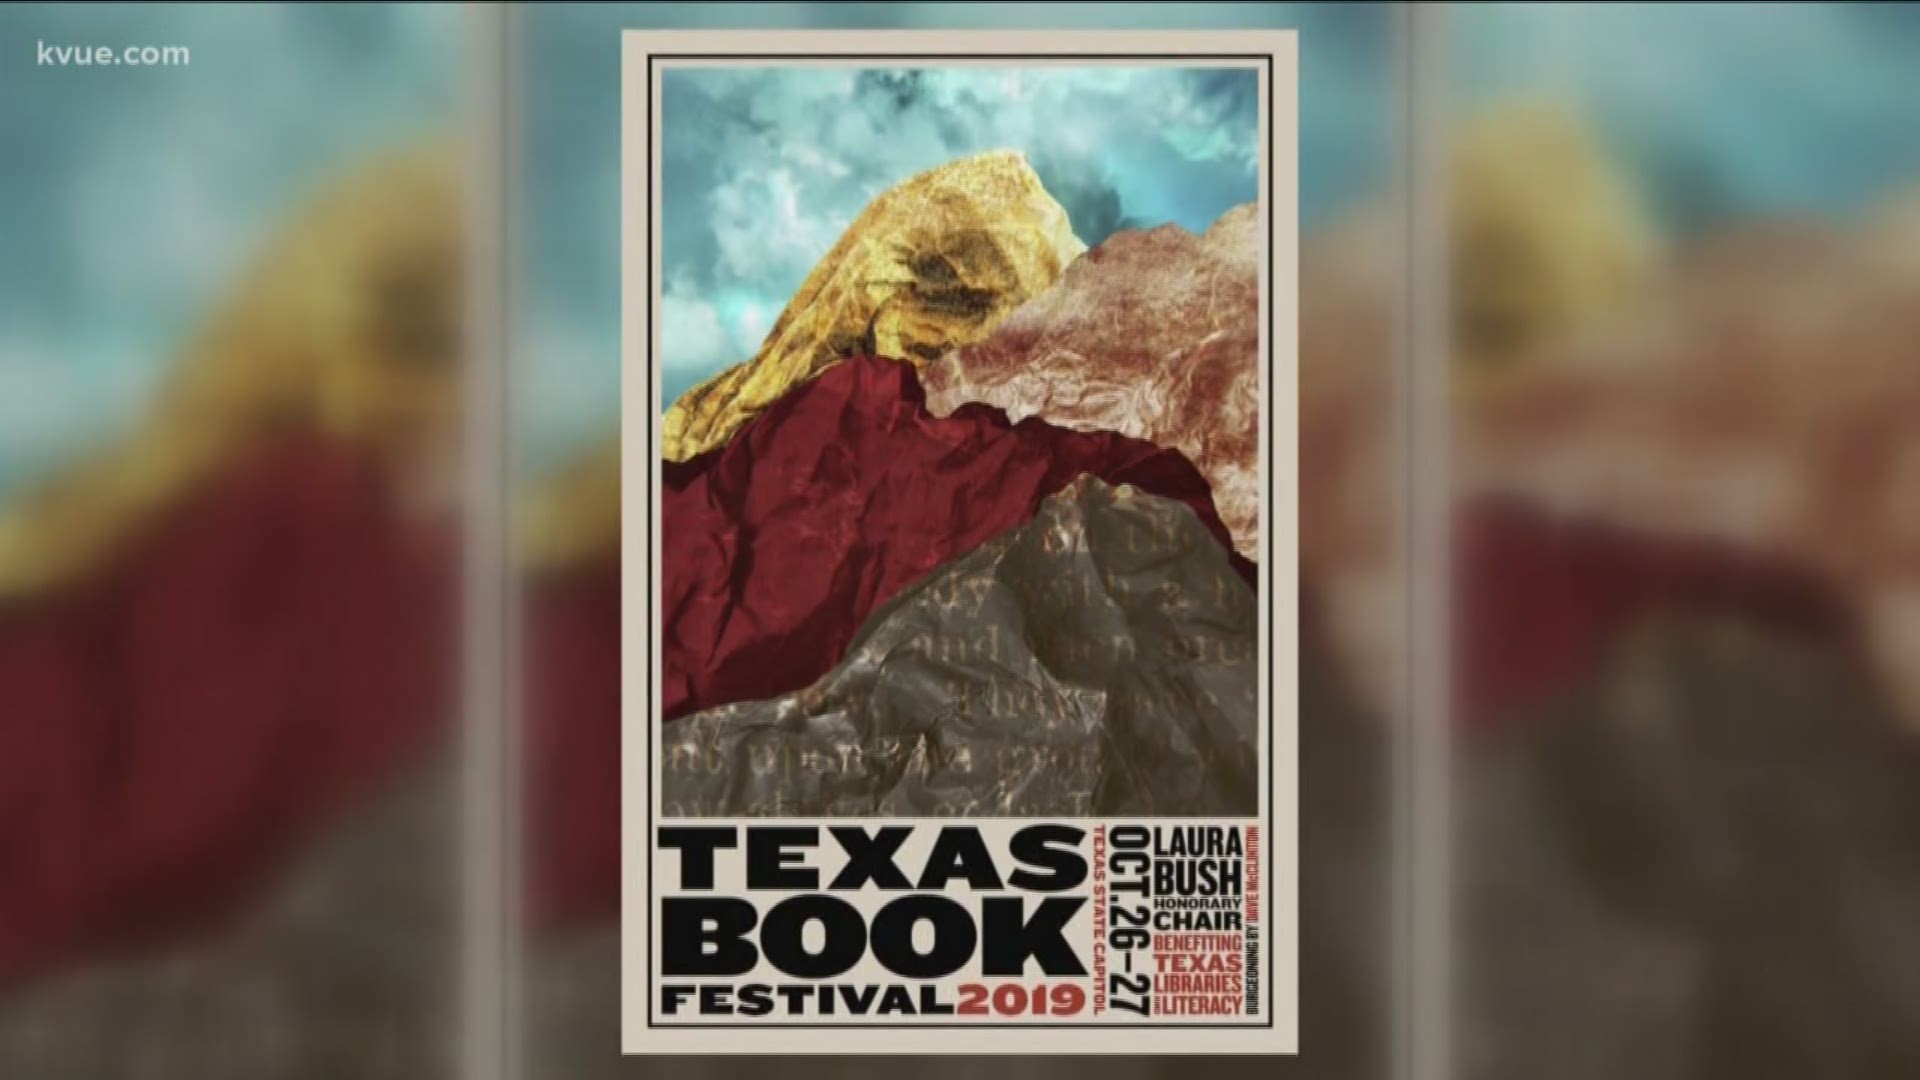 The Texas Book Festival announced the first 15 authors who will be at the event in October.